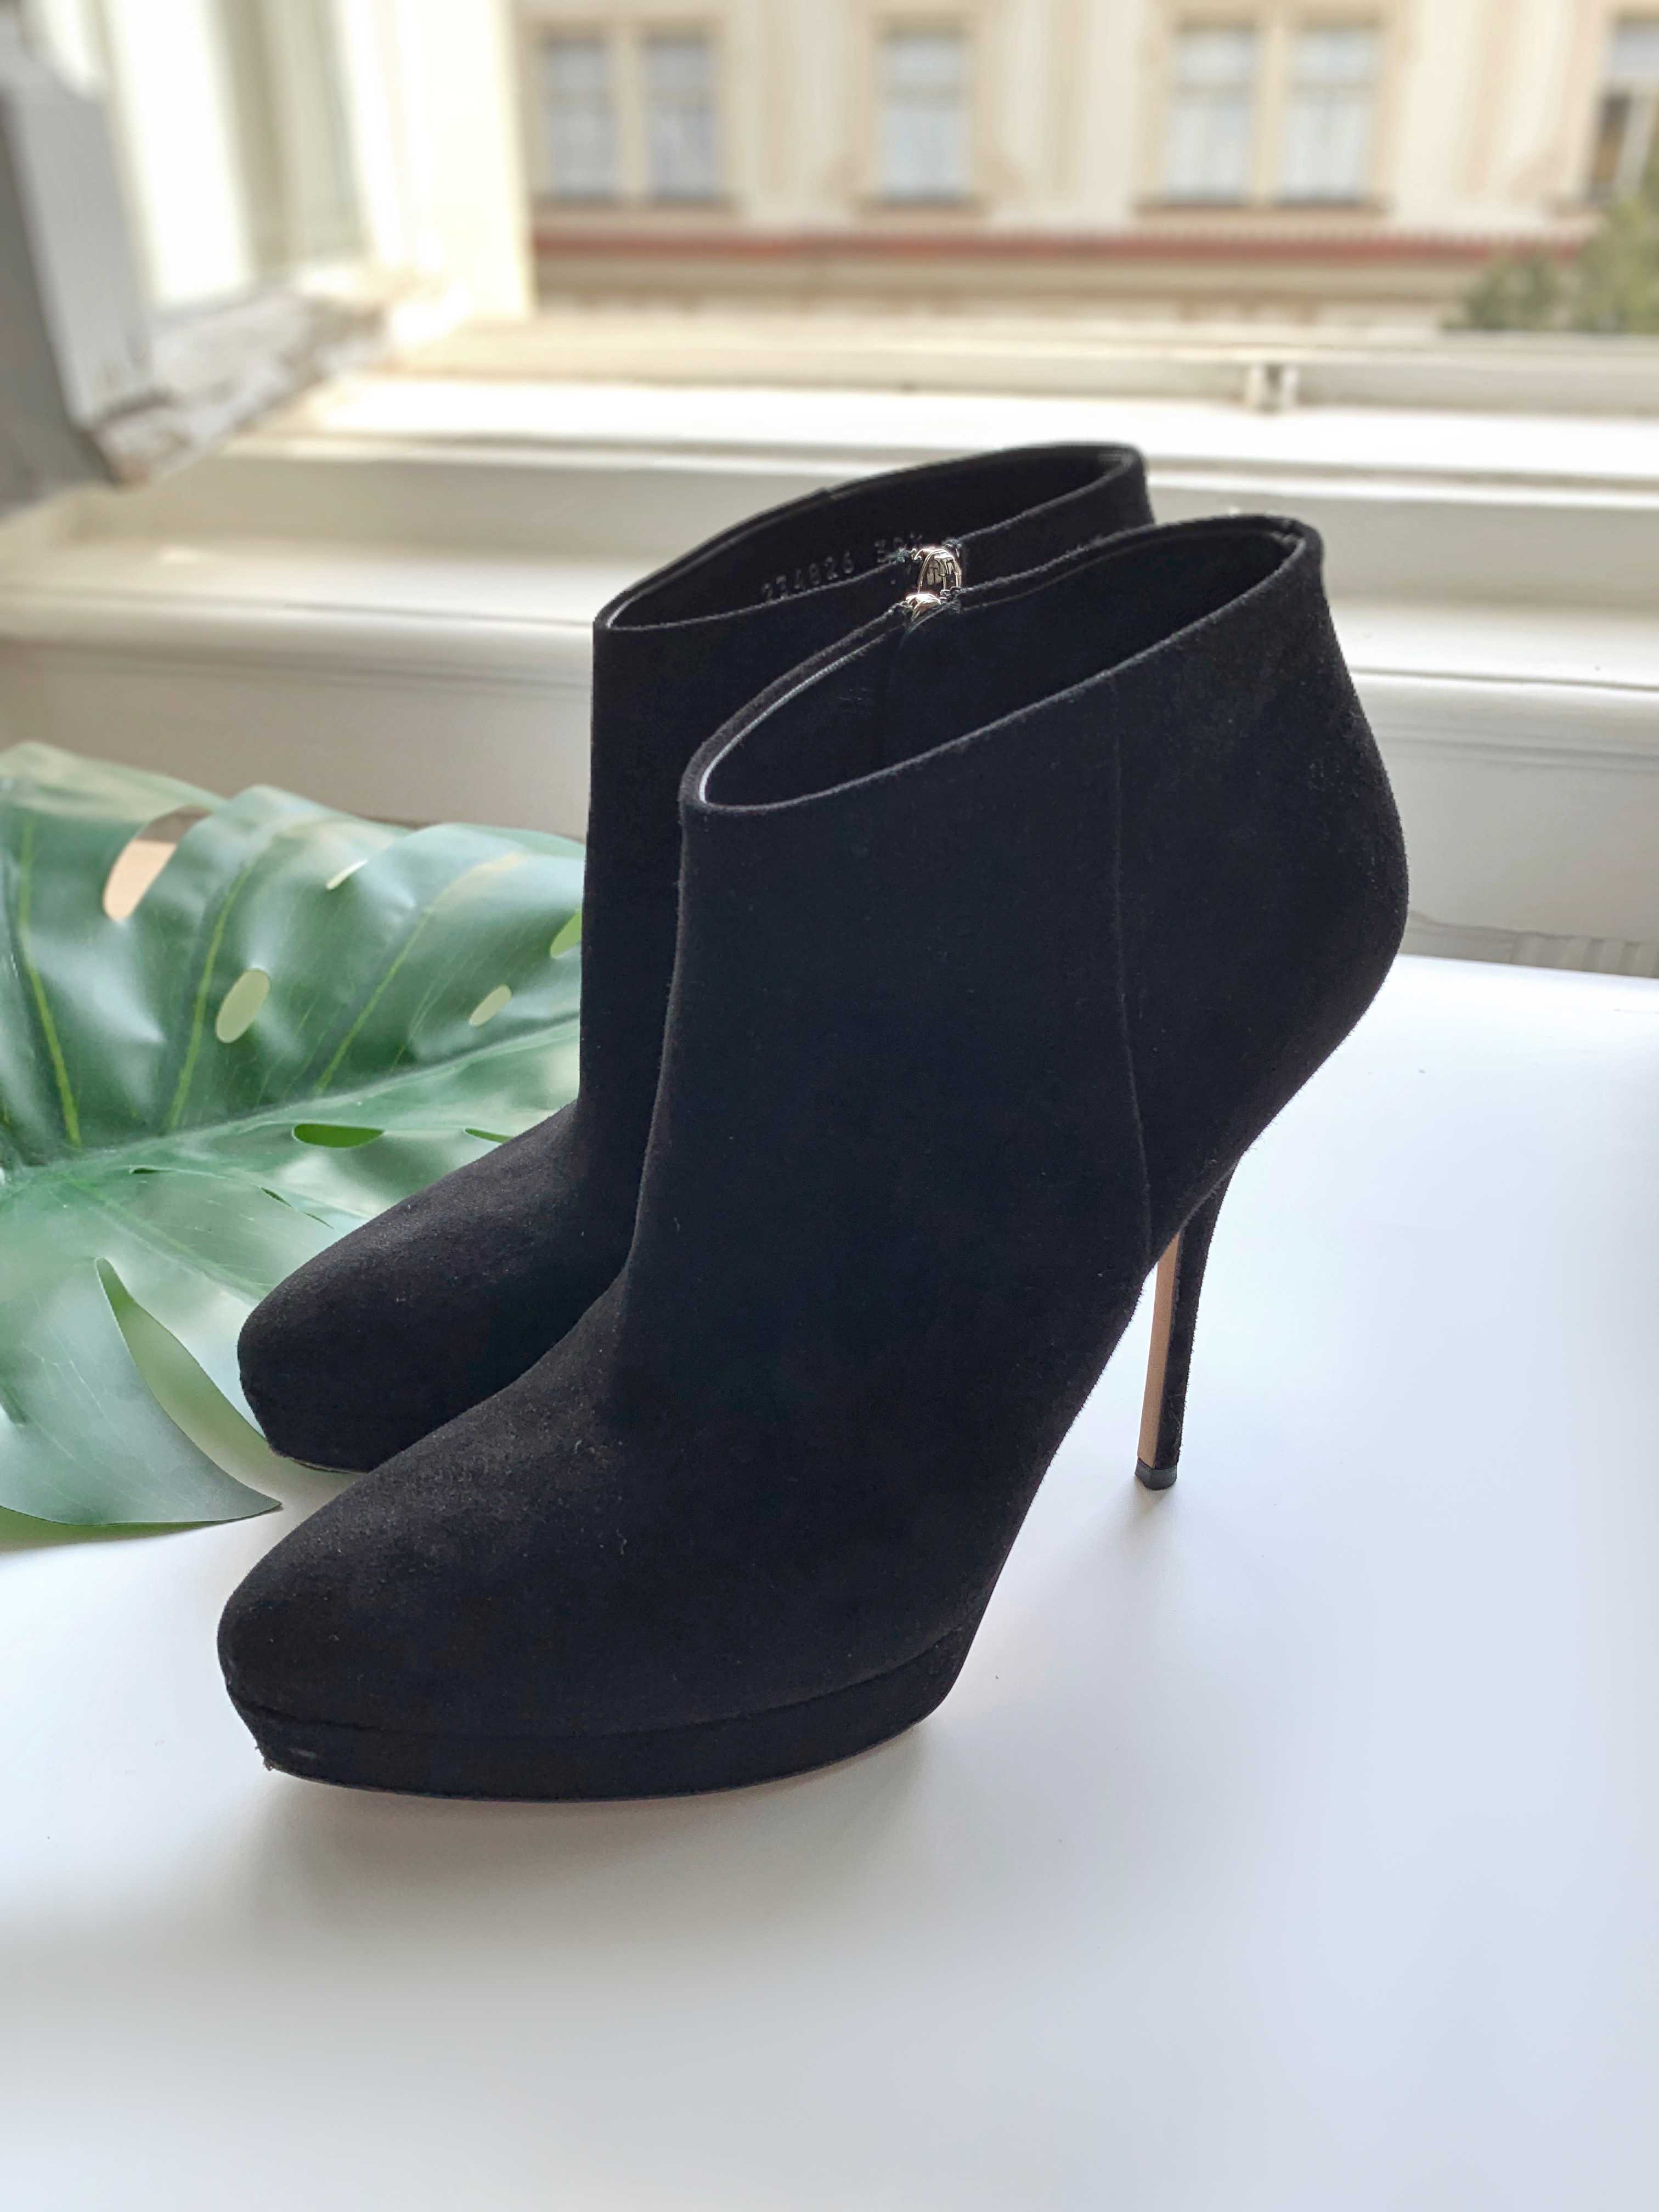 Gucci - Sofia Suede Ankle High Heel Boots Black 39,5 